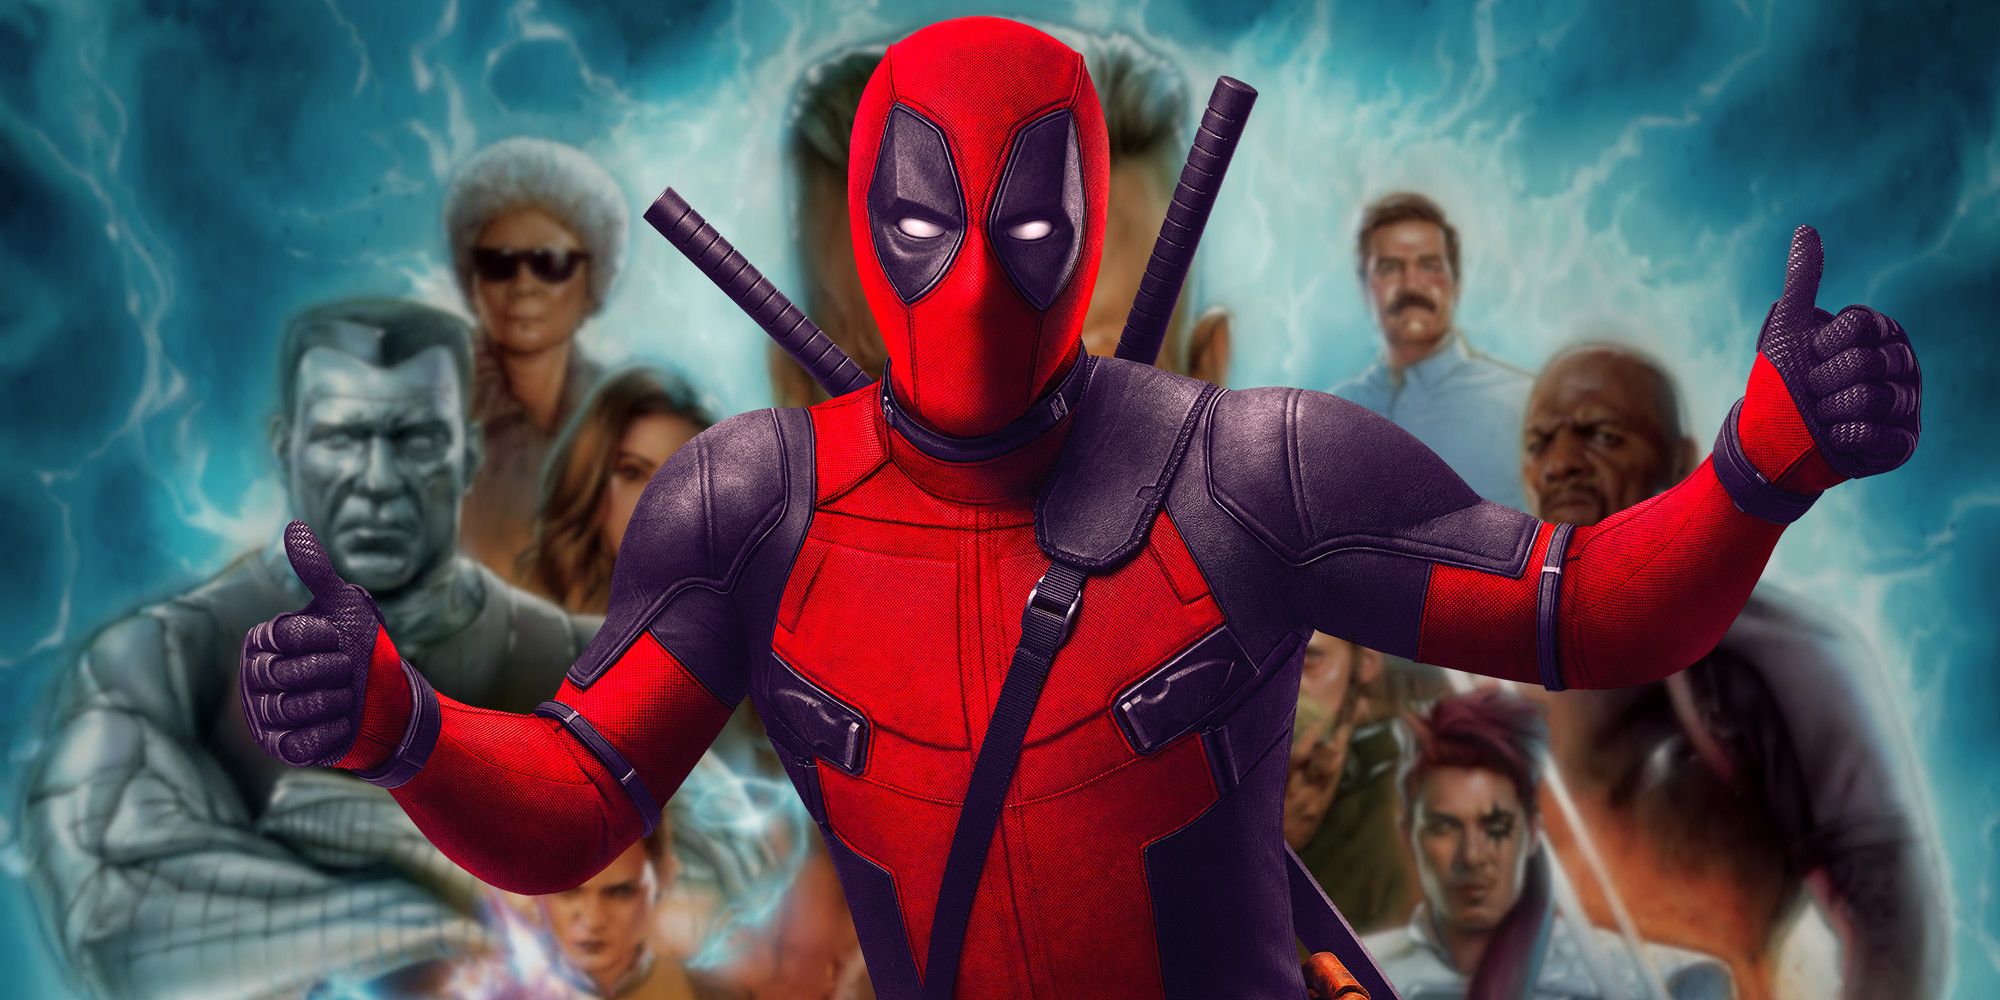 Does Deadpool 2 Have An After-Credits Scene?